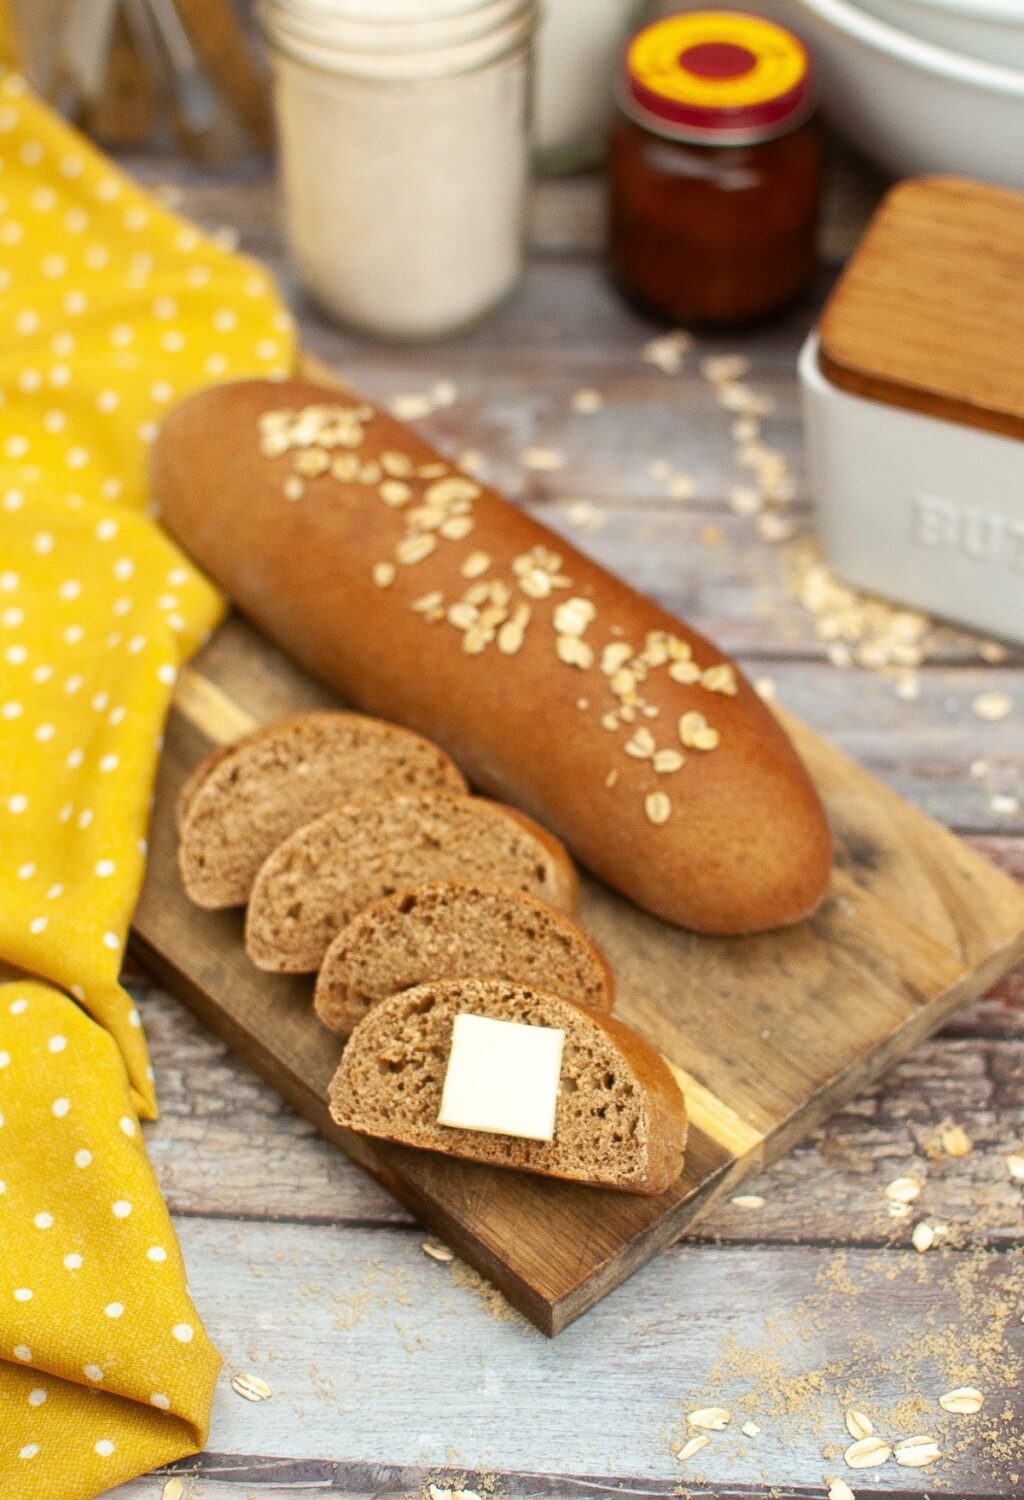 A loaf of bread on a cutting board with butter and oats.